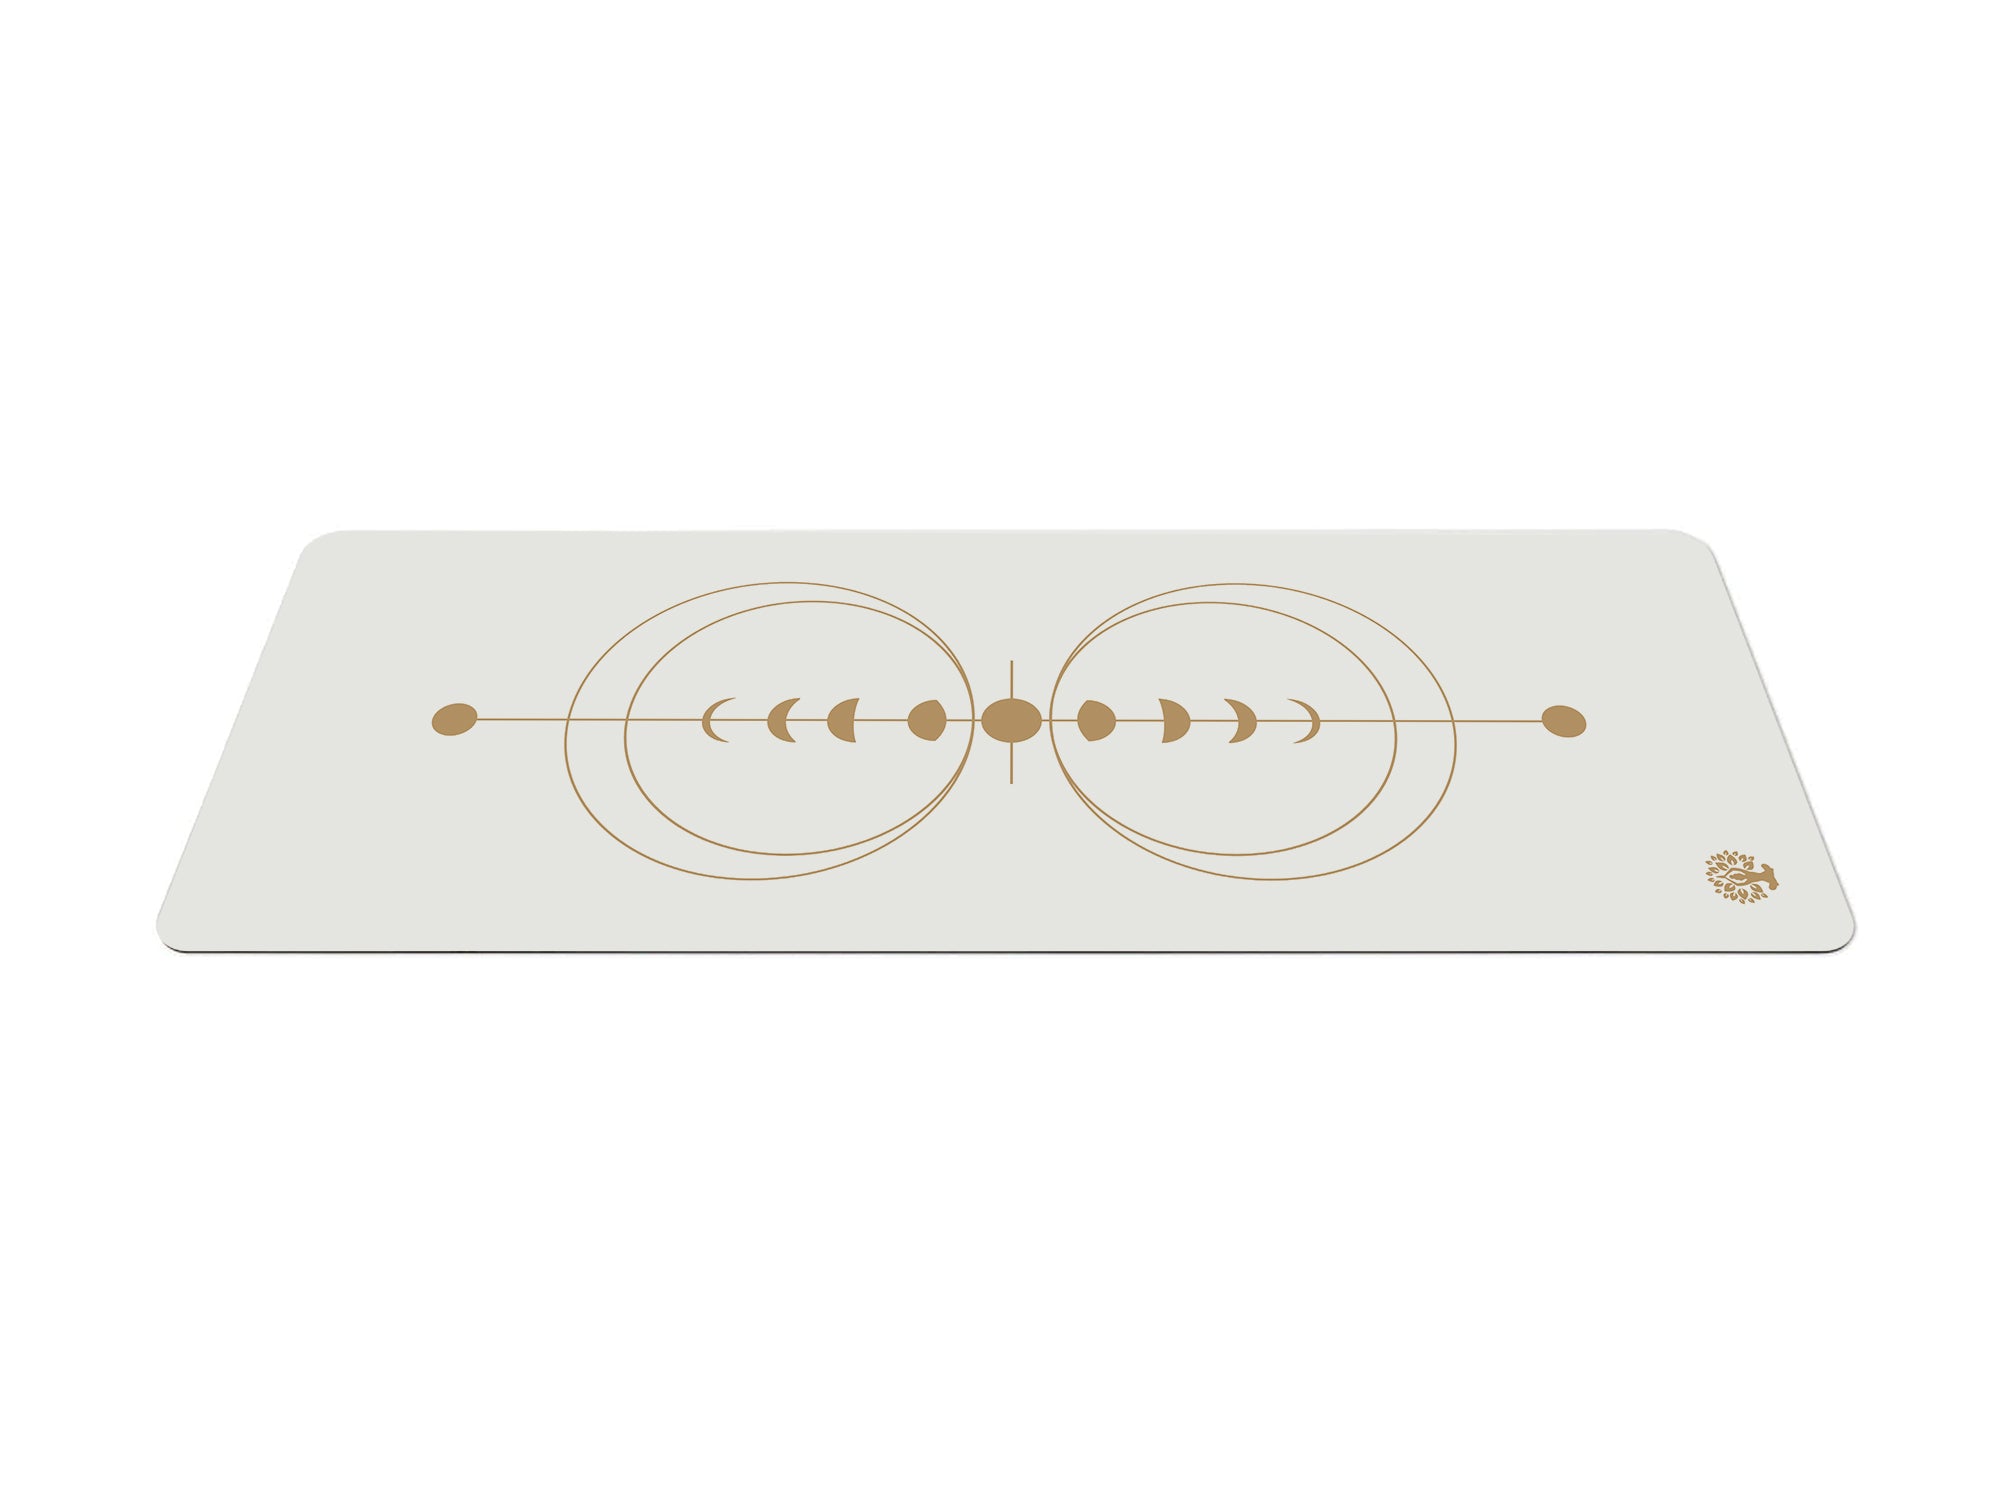 Yoga mat with golden solar phase pattern